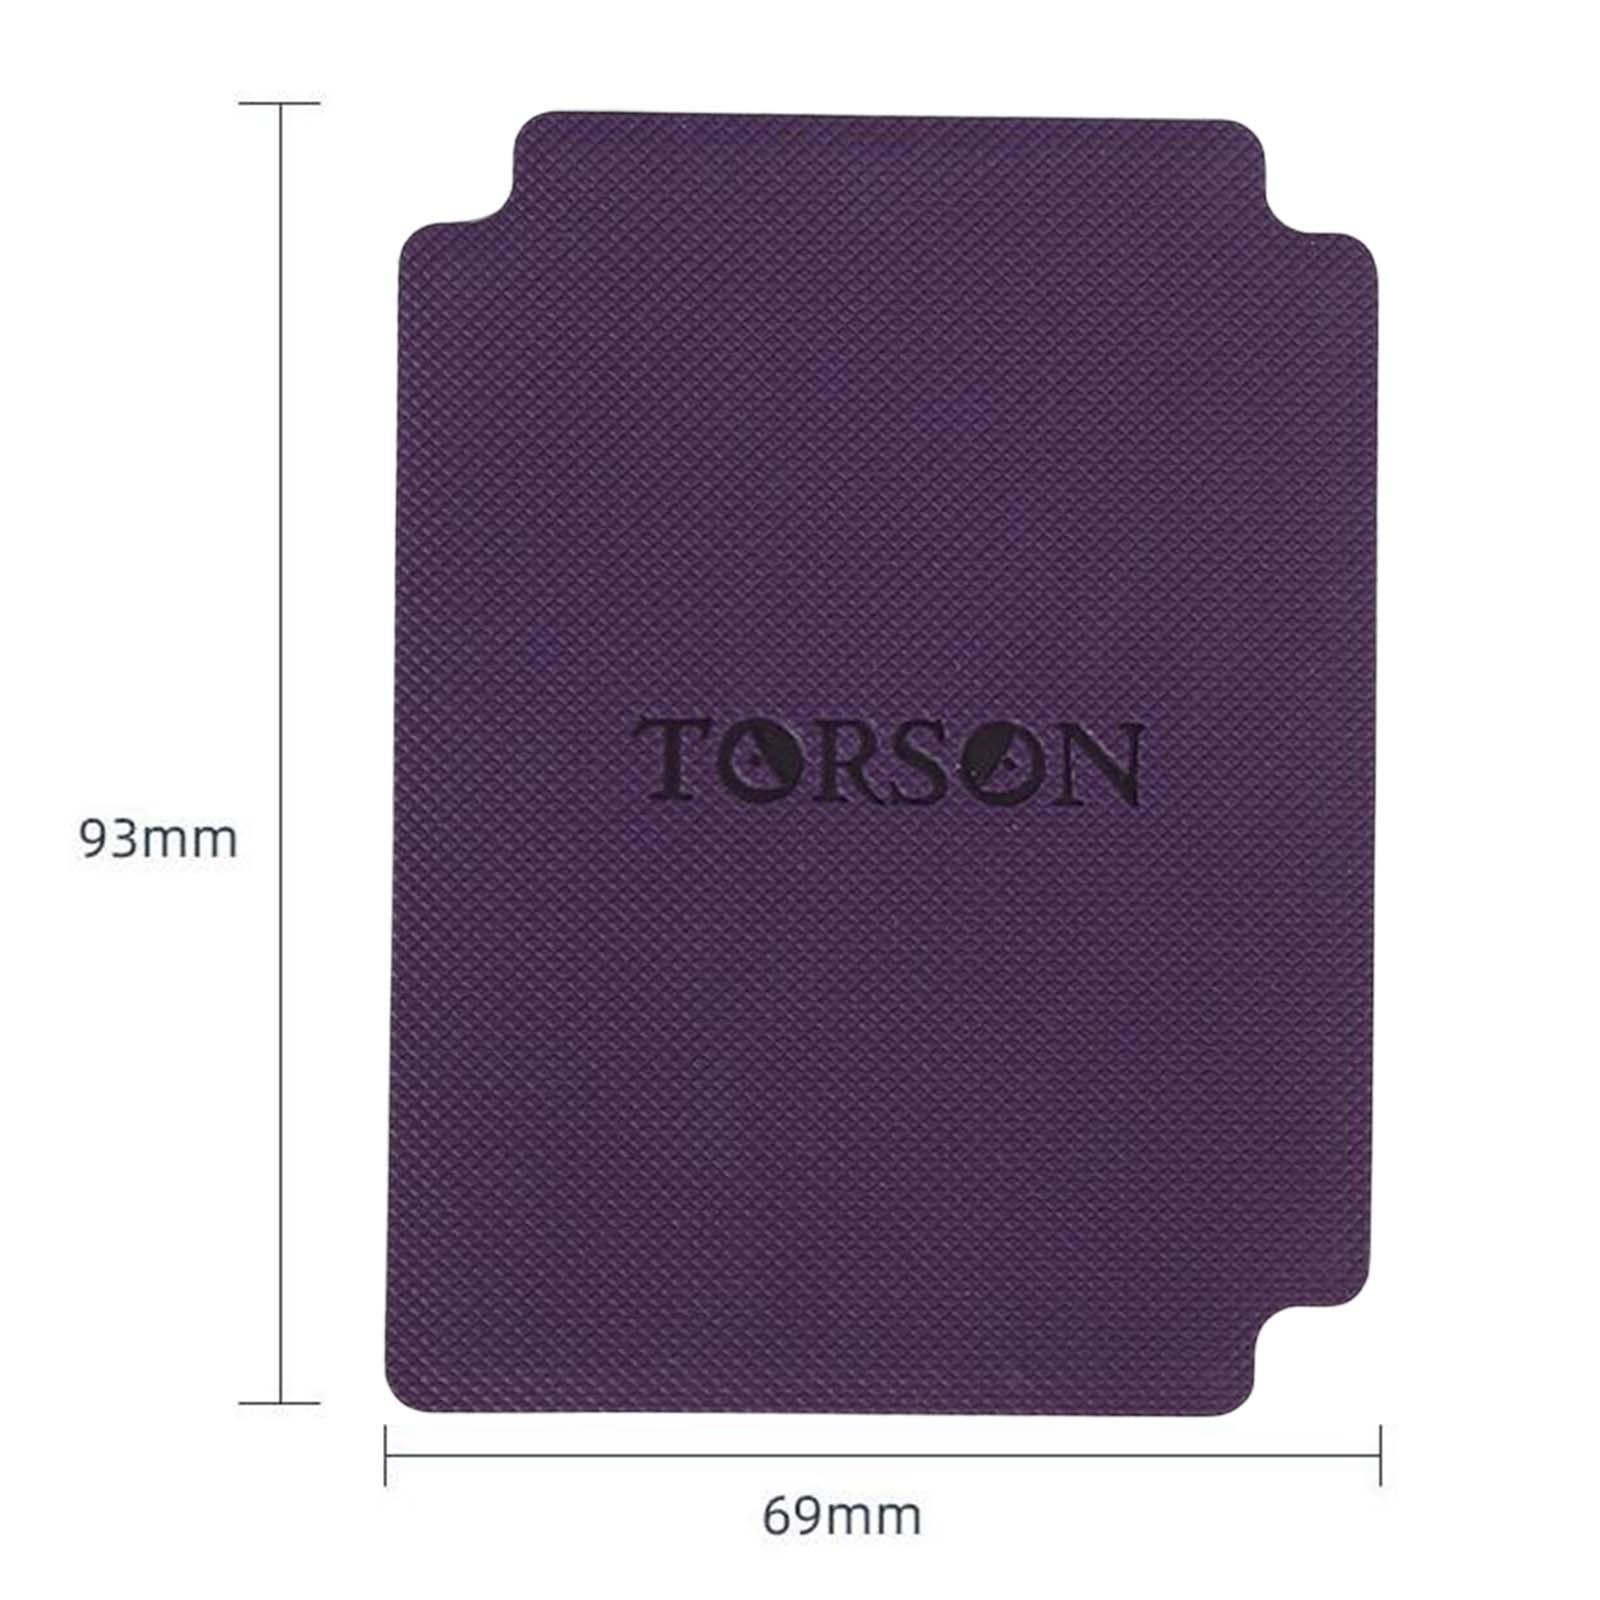 Games Sports Trading Card Dividers Card Separator 2.7 x 3.7 Inches Purple